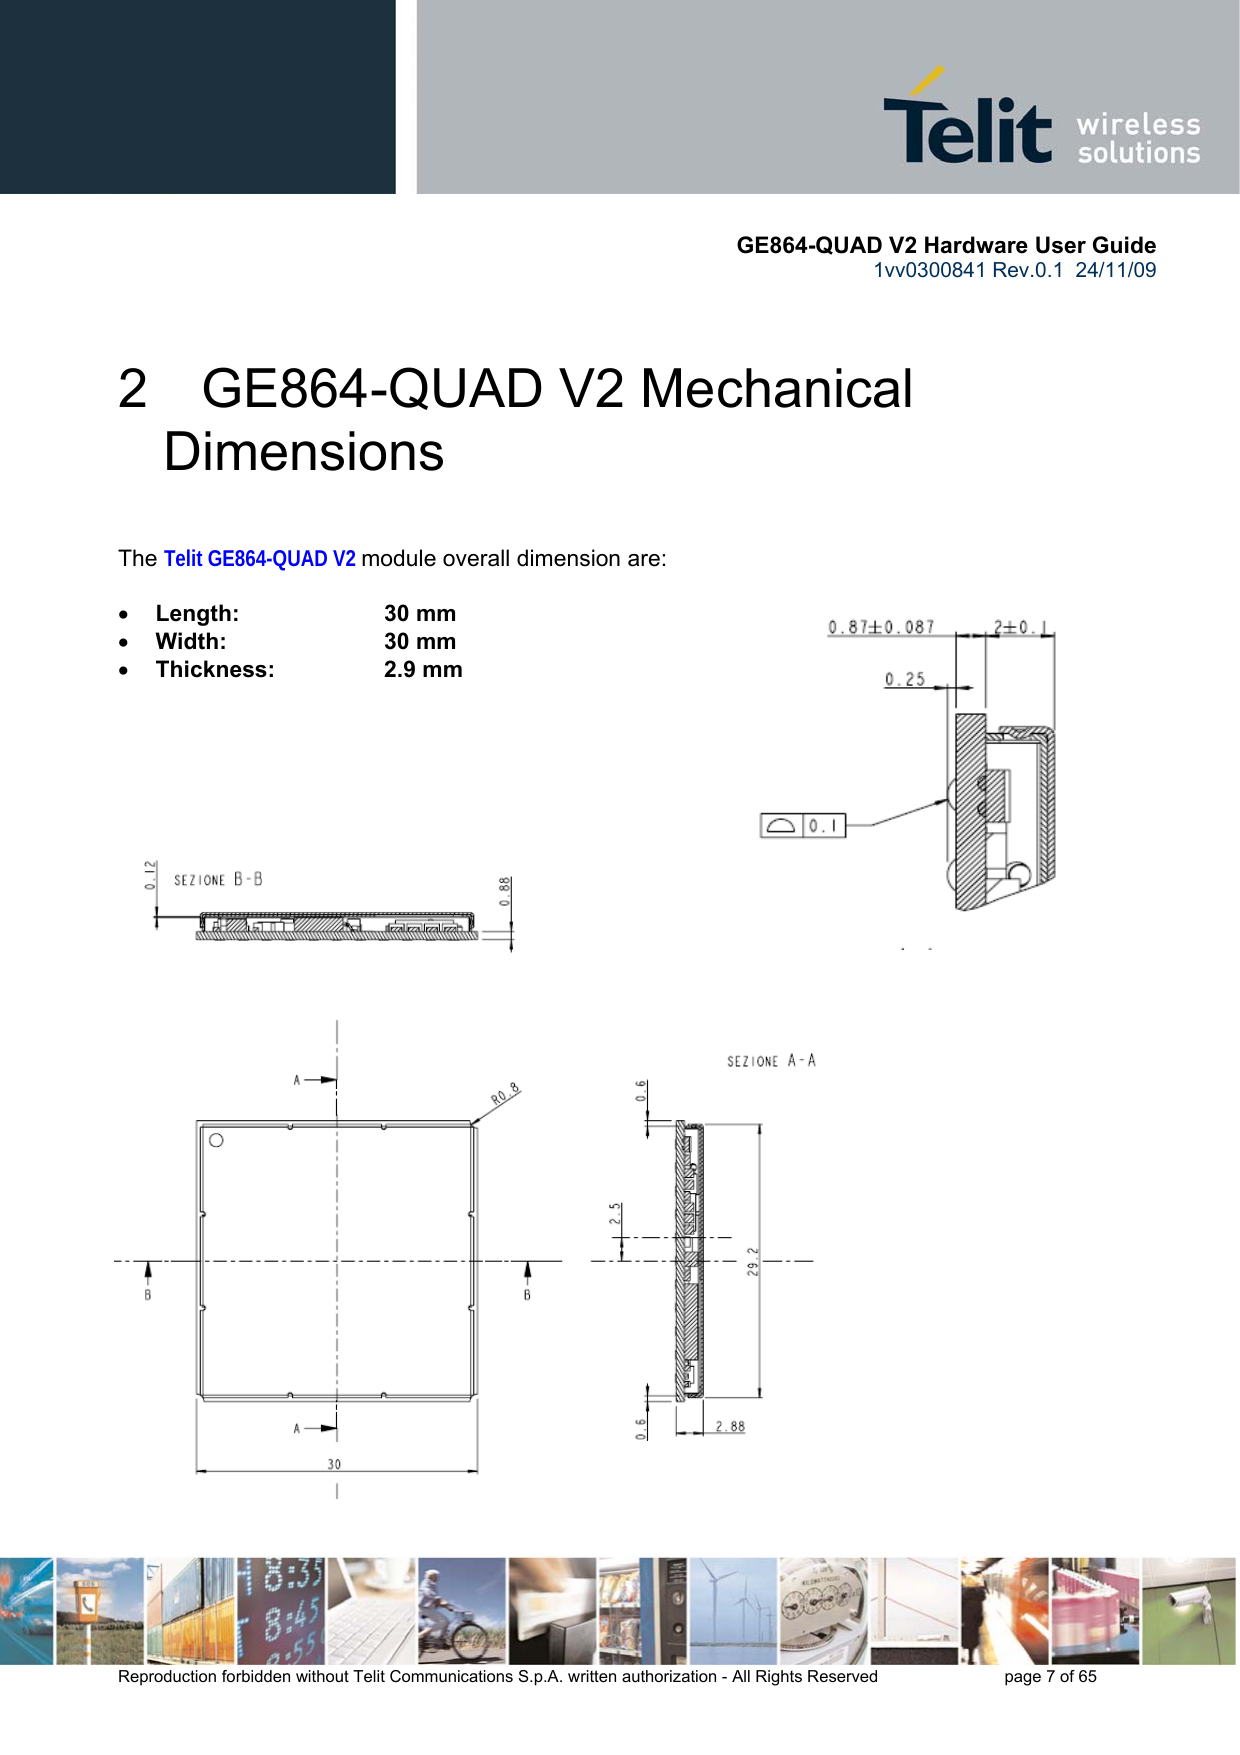       GE864-QUAD V2 Hardware User Guide 1vv0300841 Rev.0.1  24/11/09      Reproduction forbidden without Telit Communications S.p.A. written authorization - All Rights Reserved    page 7 of 65  2  GE864-QUAD V2 Mechanical Dimensions  The Telit GE864-QUAD V2 module overall dimension are:  • Length:     30 mm • Width:     30 mm  • Thickness:     2.9 mm      